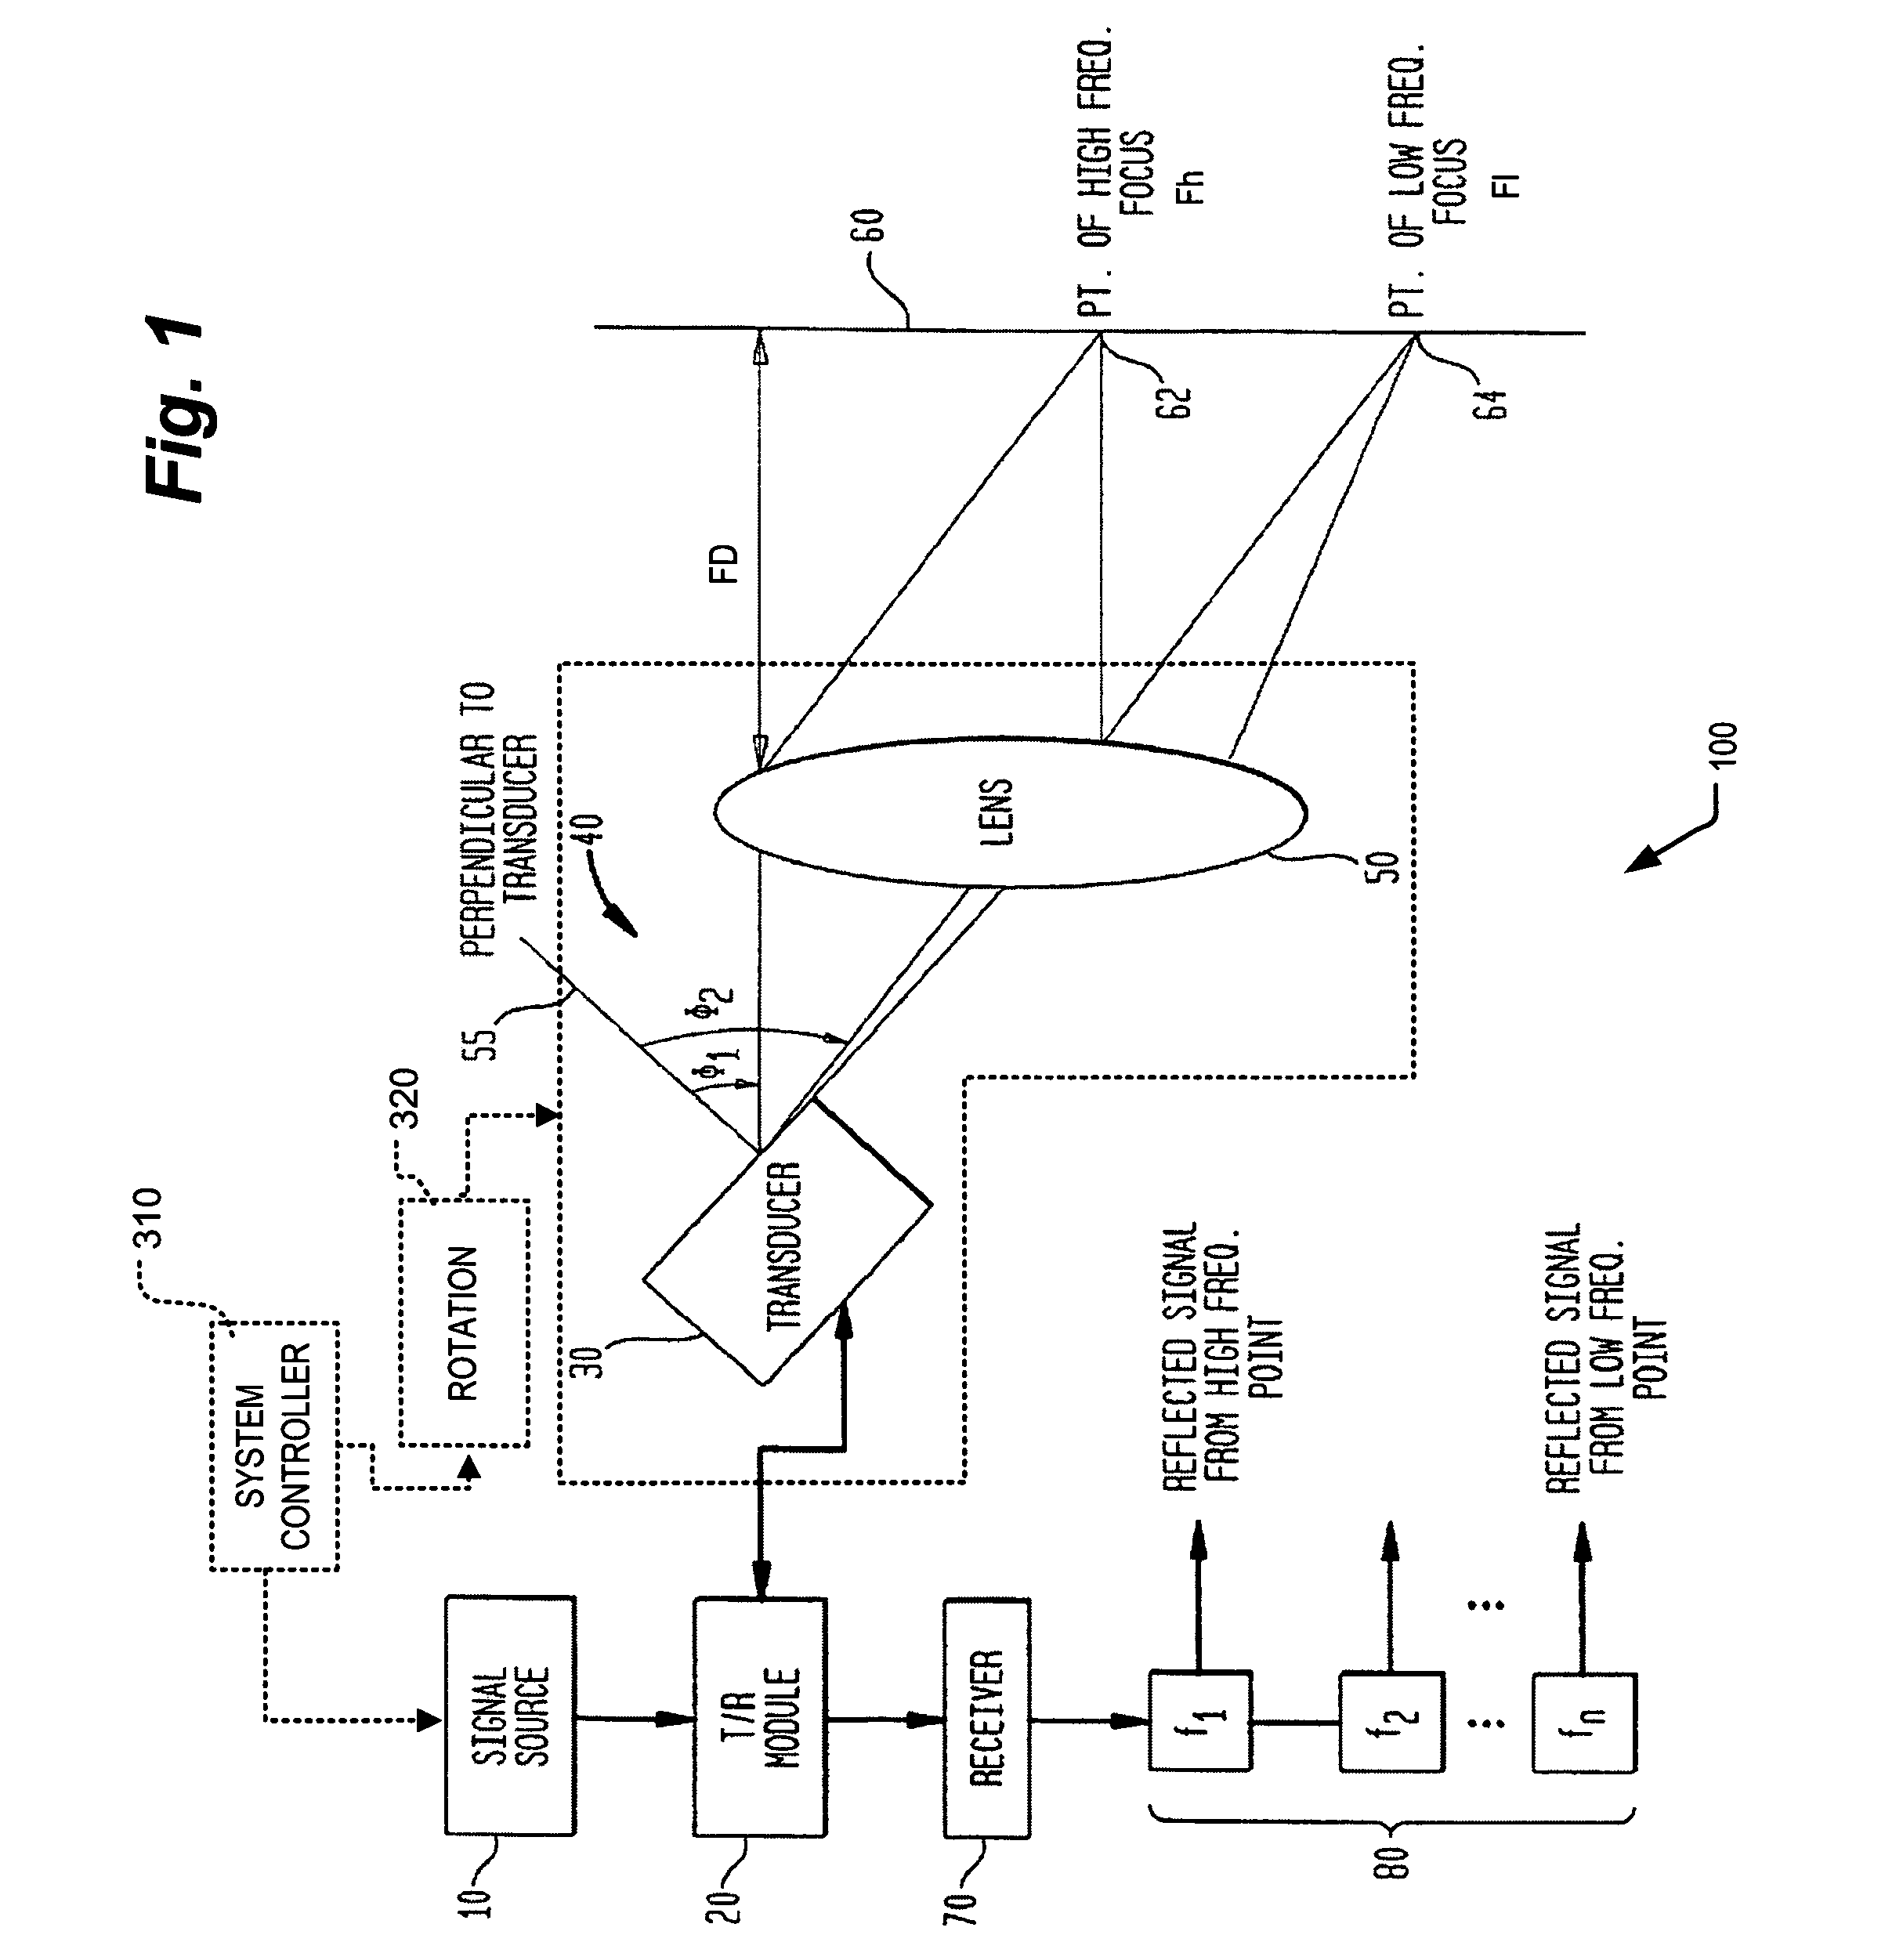 Combined therapy and imaging ultrasound apparatus